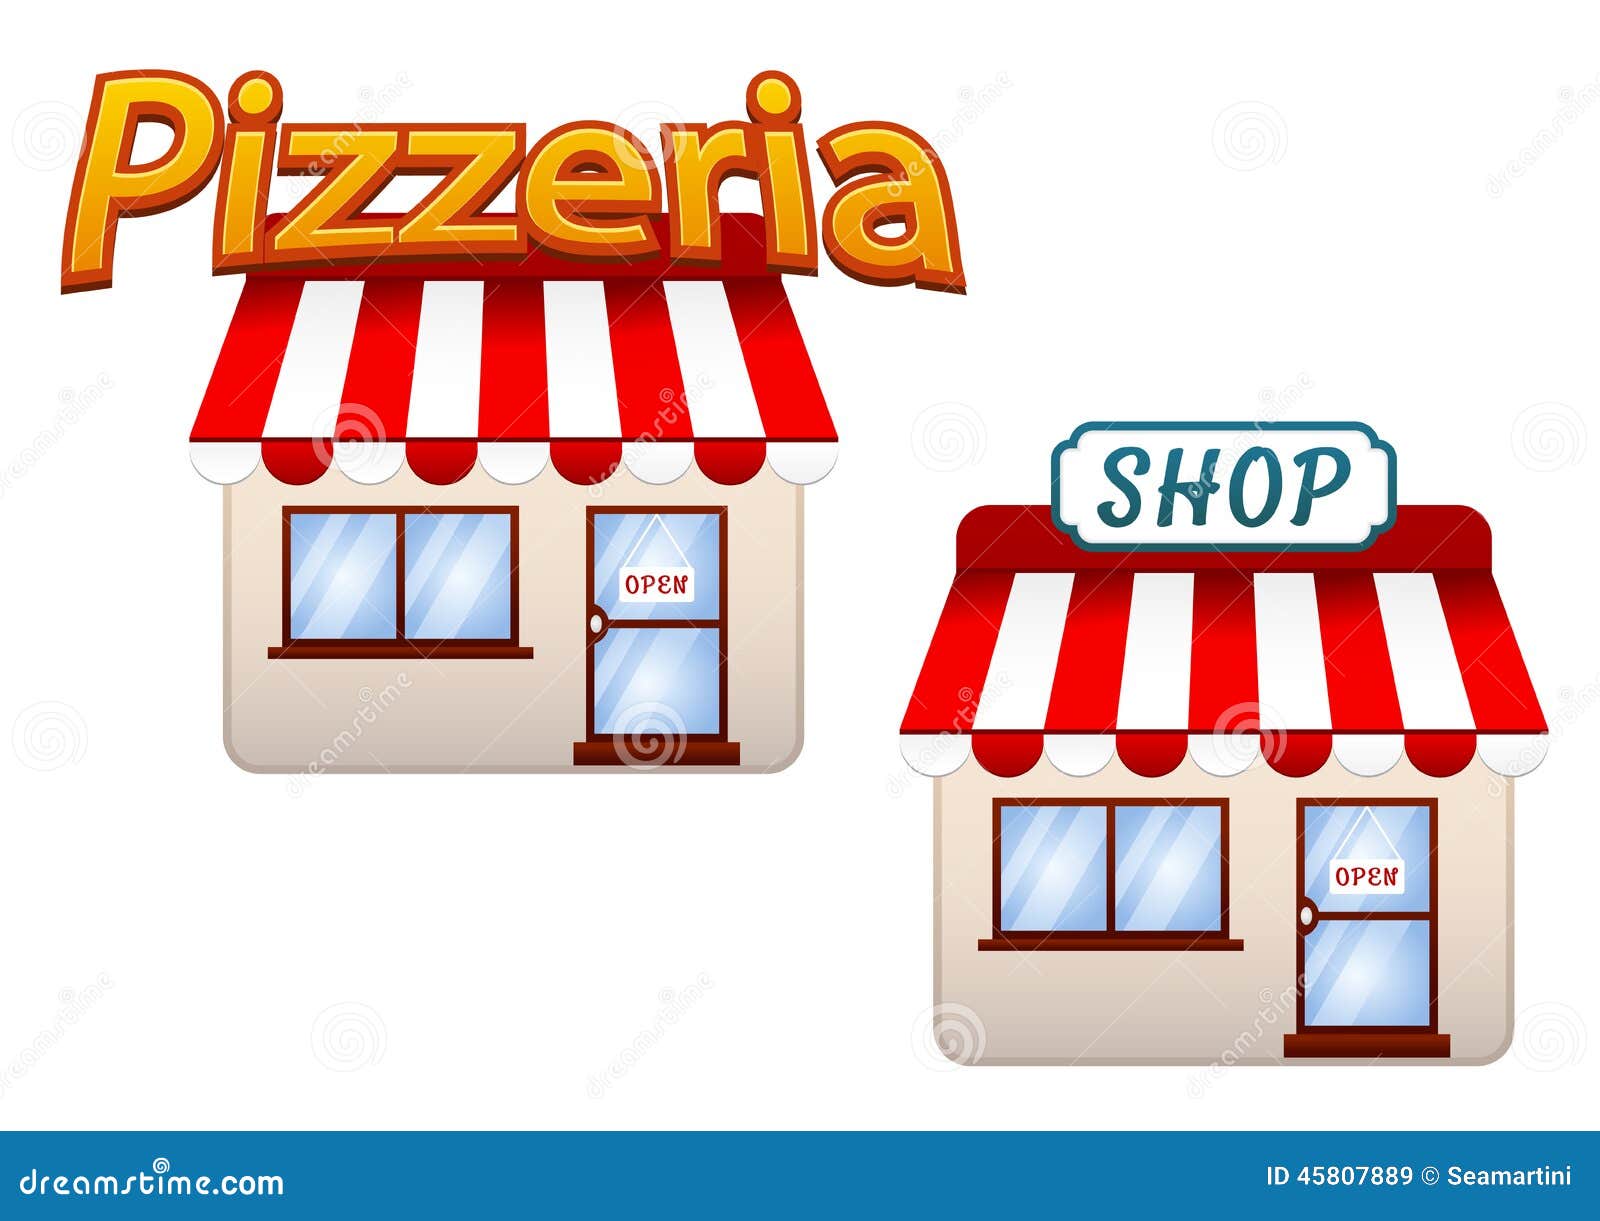 clipart retail store - photo #38